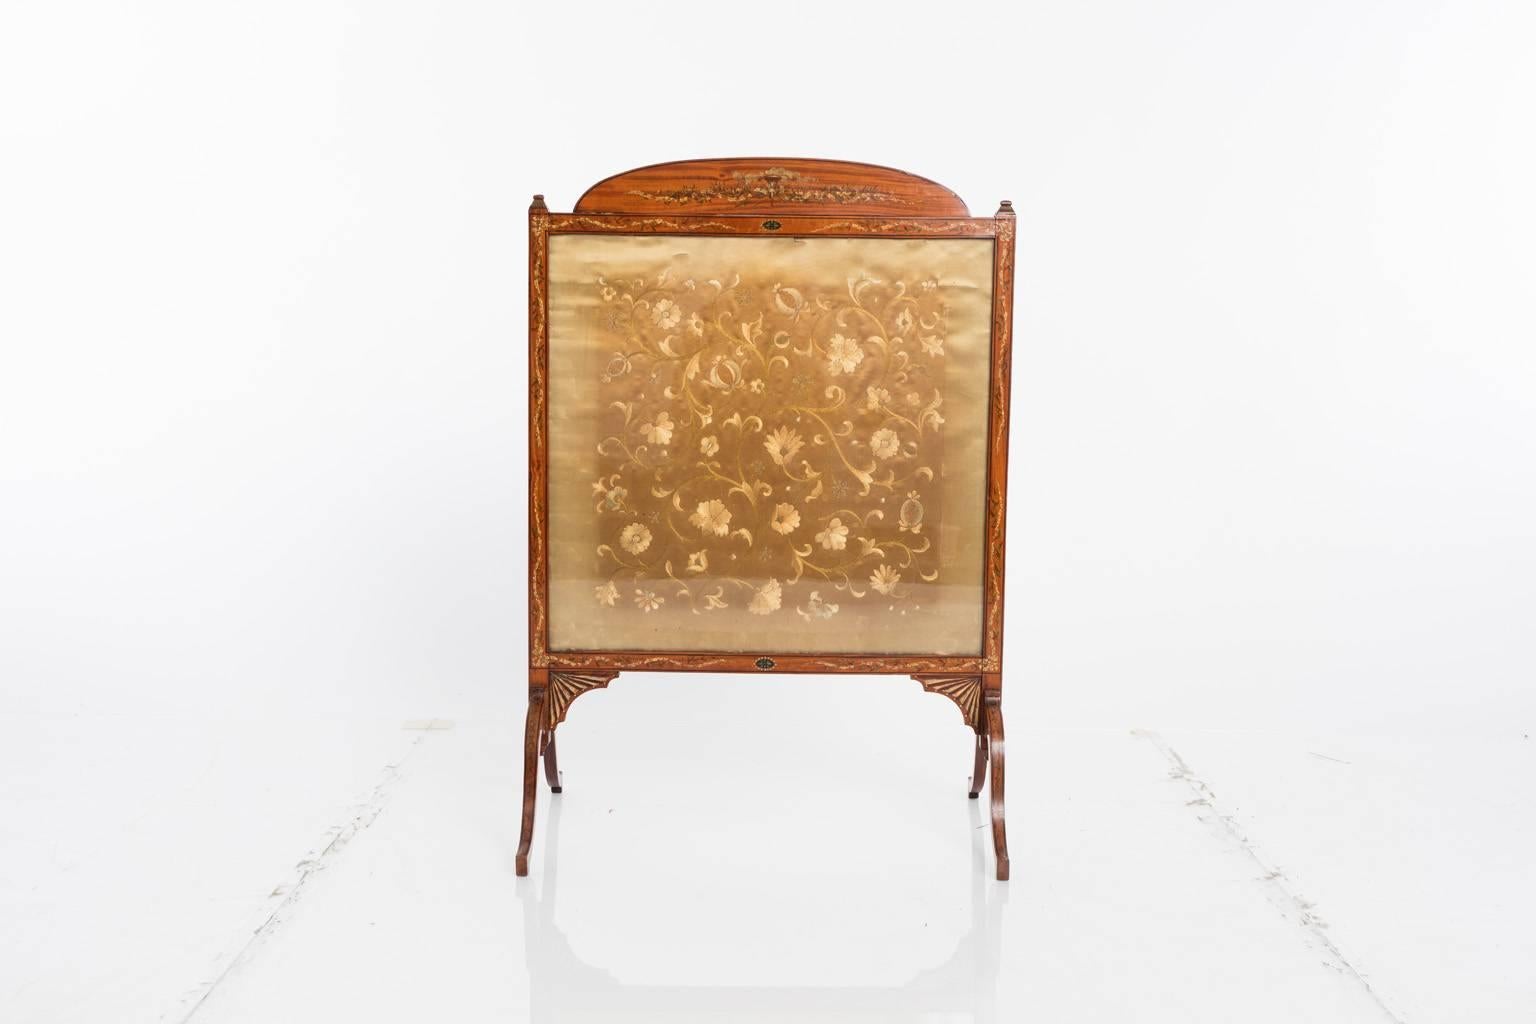 Adams style fire screen with satinwood and chinoiserie silk fabric decoration.